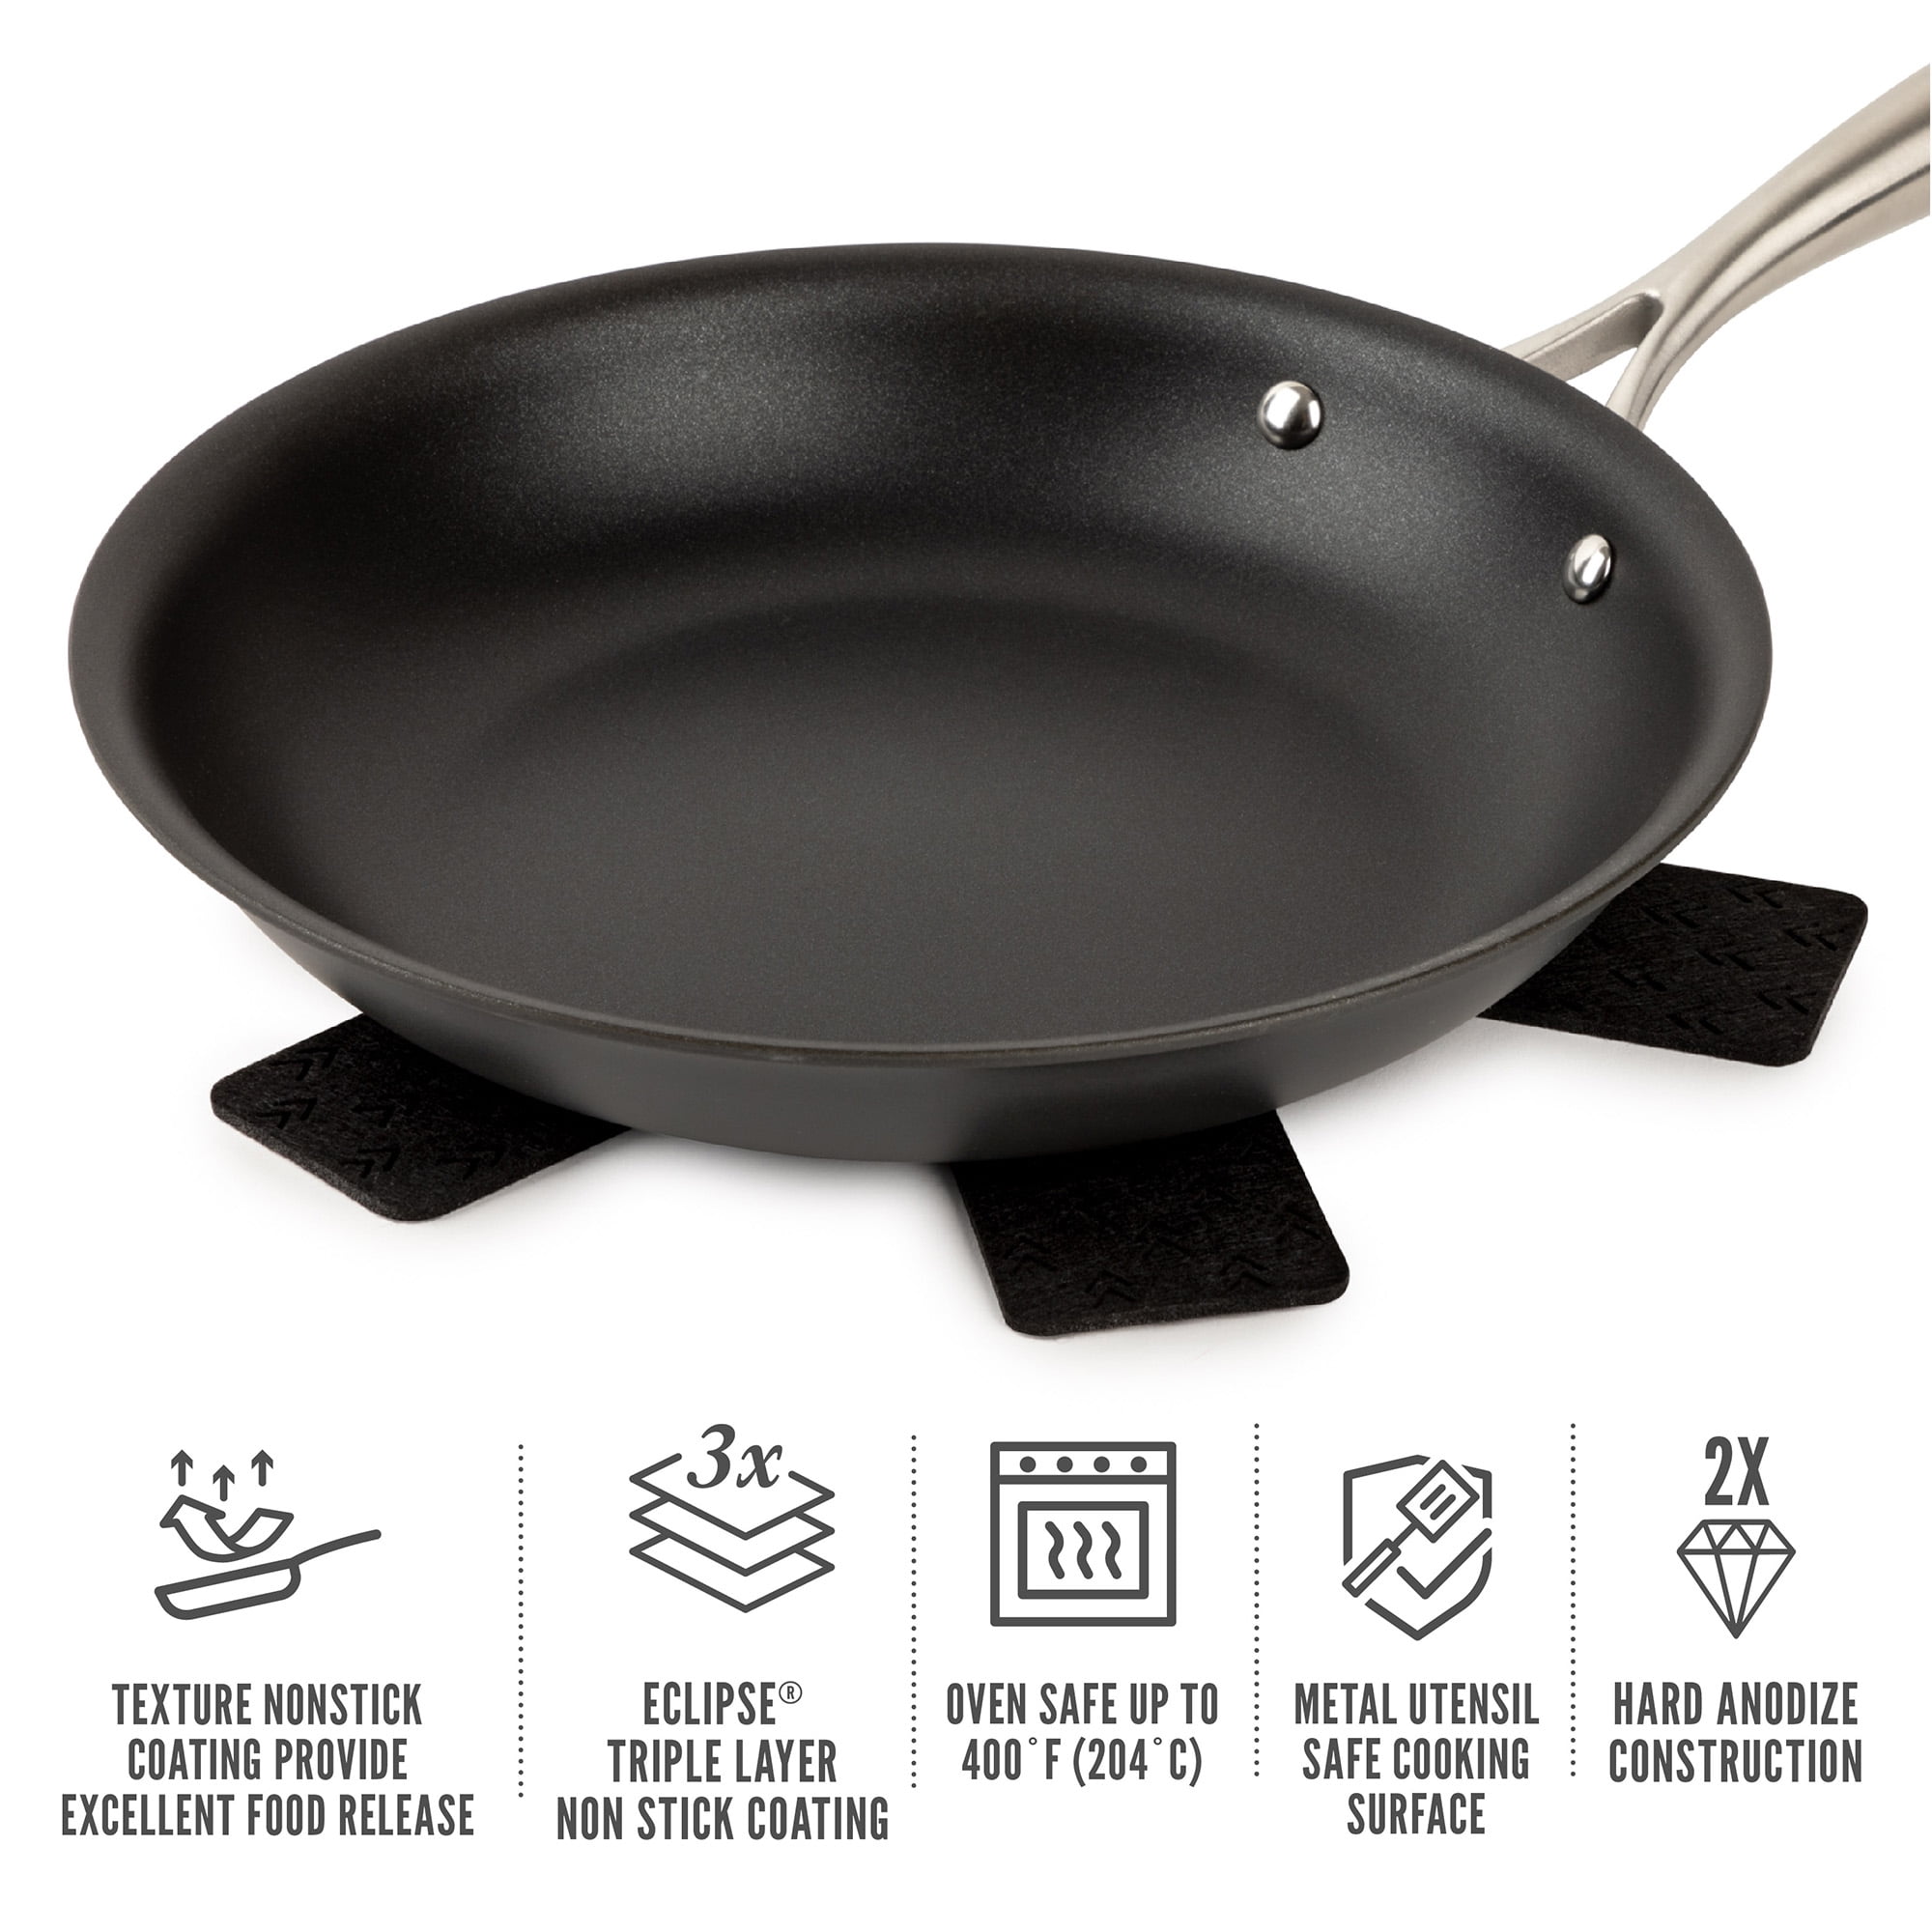 Oster 10 in. Forged Aluminum Nonstick Round Pancake Frying Pan 985120057M -  The Home Depot